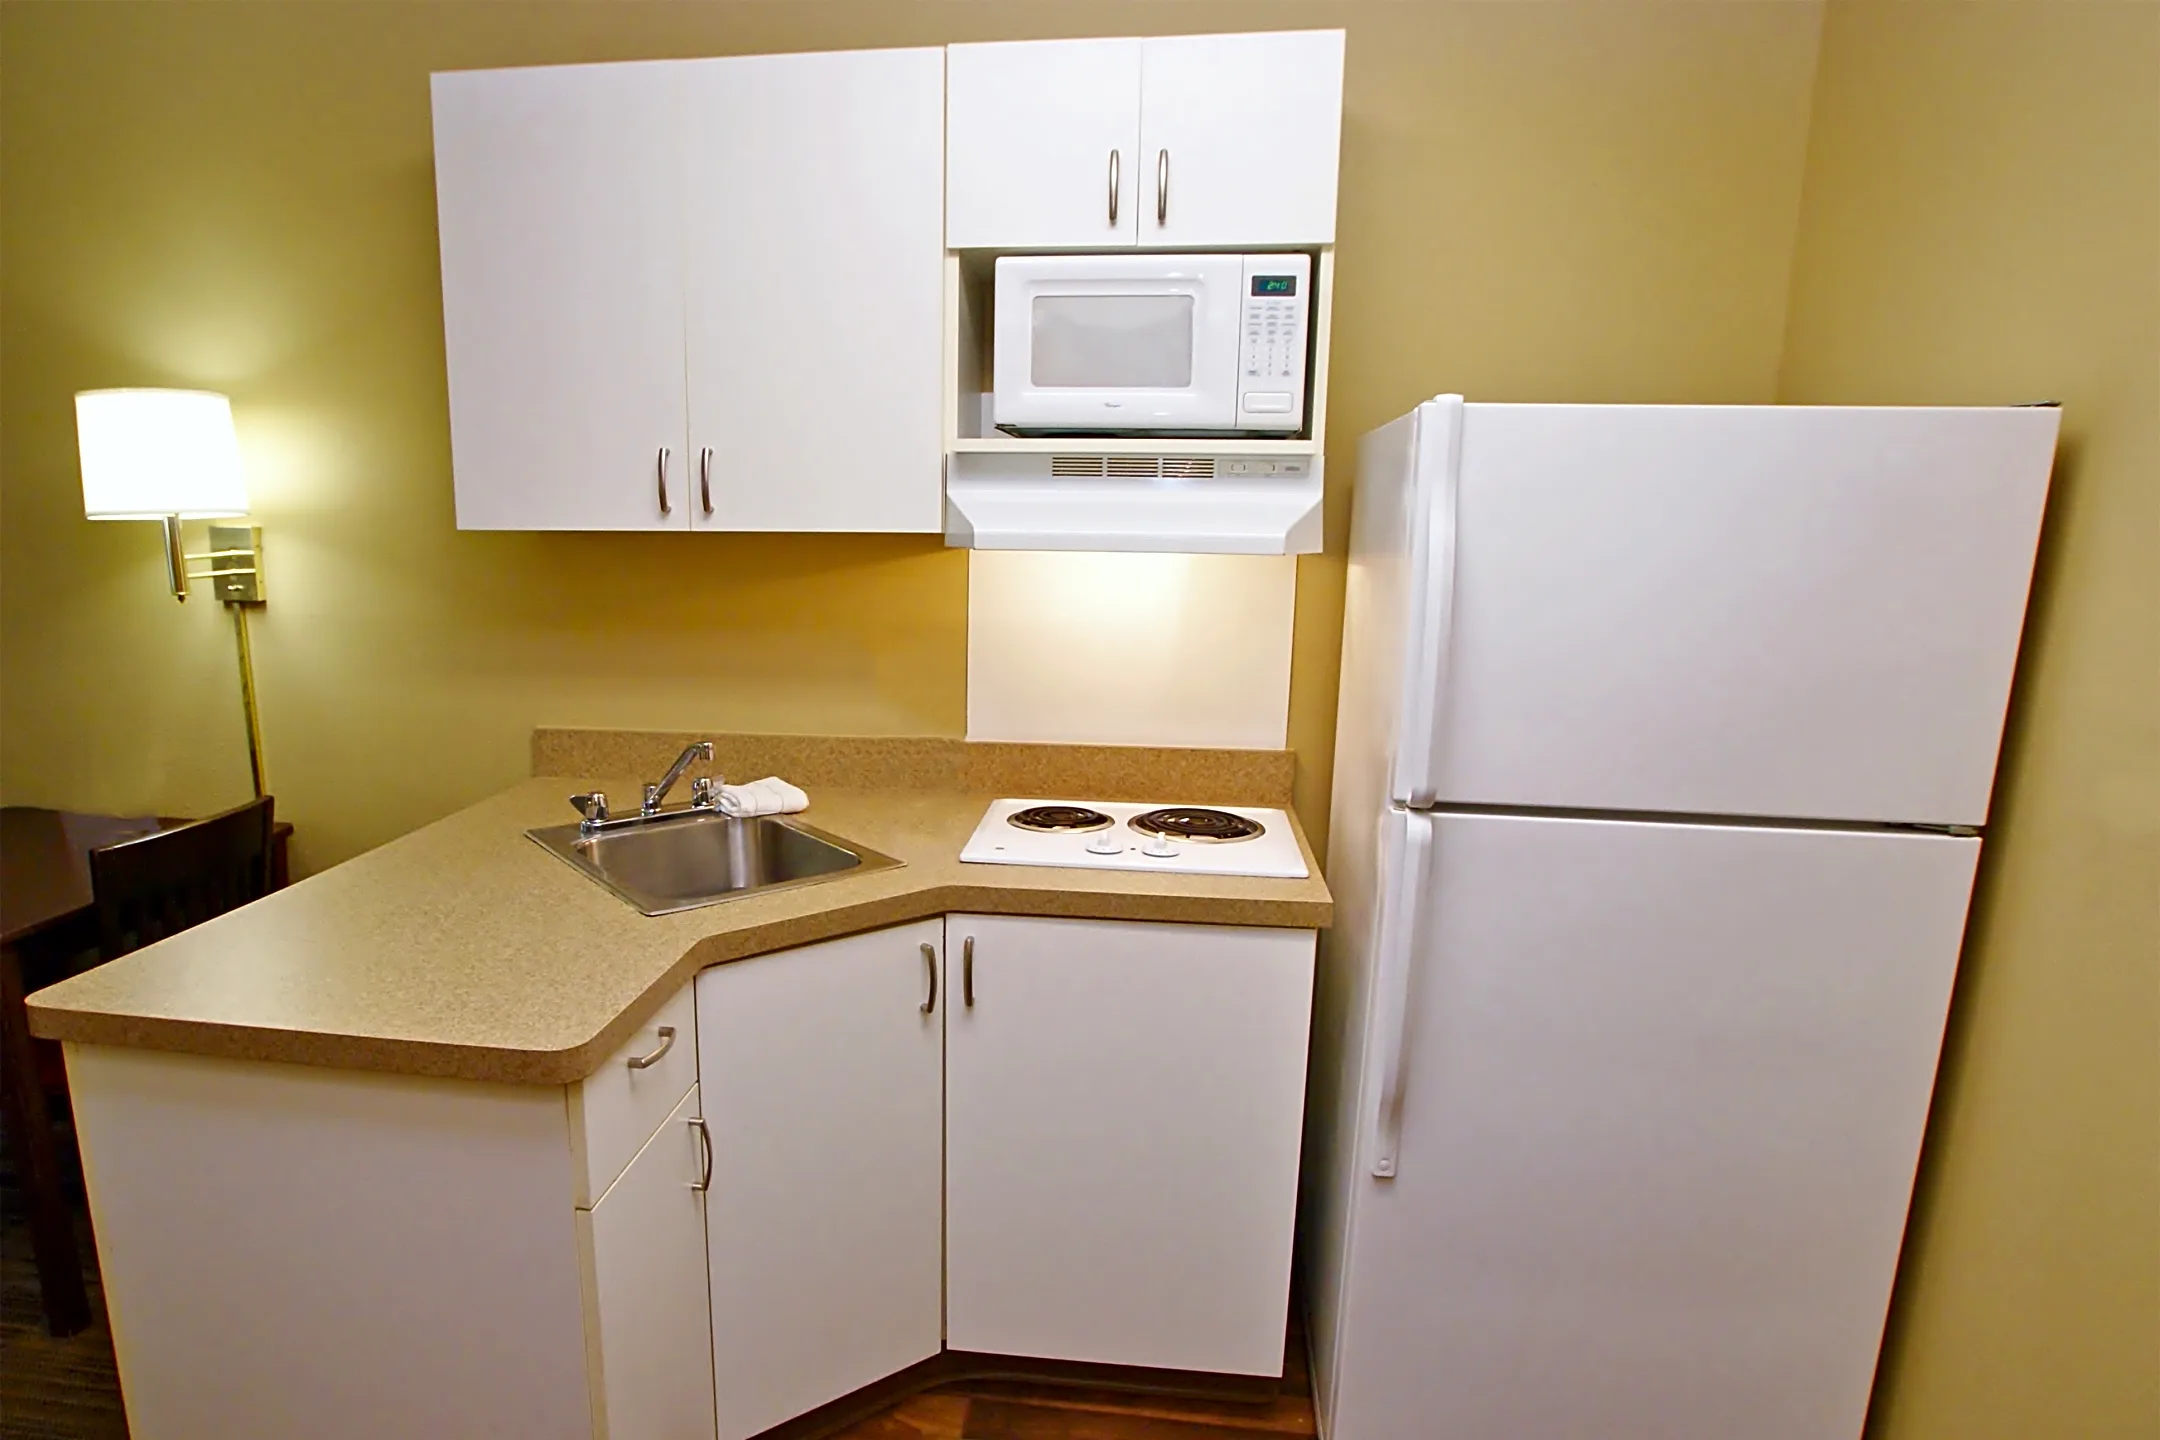 Kitchen - Furnished Studio - Annapolis - Womack Drive - Annapolis, MD